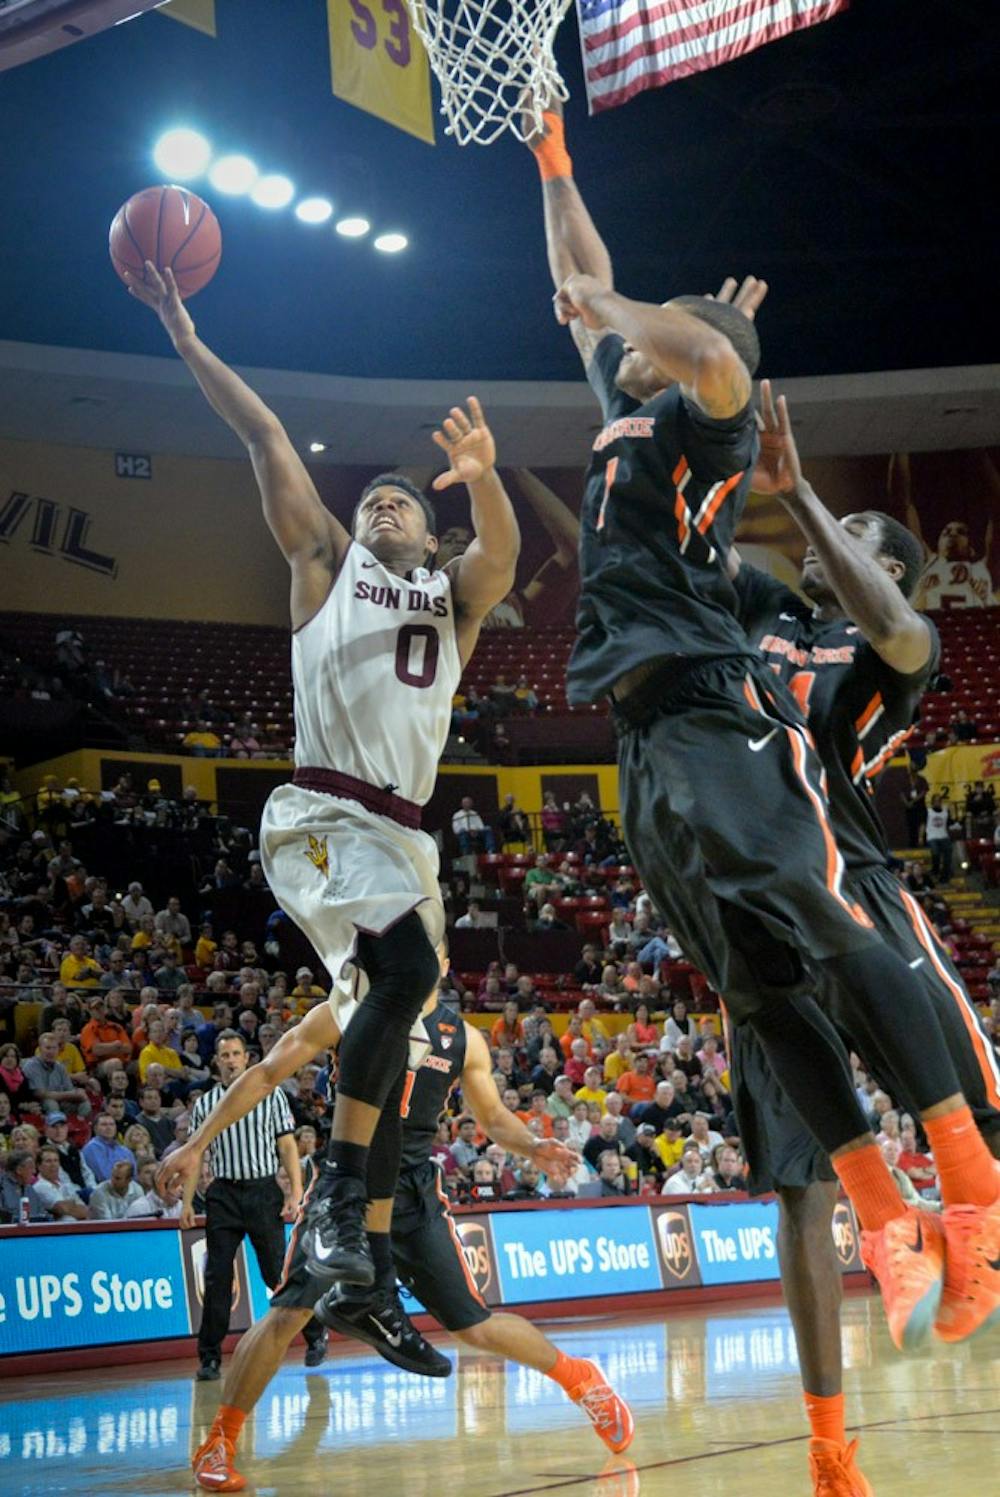 Freshman guard Tra Holder makes a layup against heavy defense on Wednesday, Jan. 28, 2015, at Wells Fargo Arena. The Sun Devils went on to win the game against OSU. (J. Bauer-Leffler/The State Press)